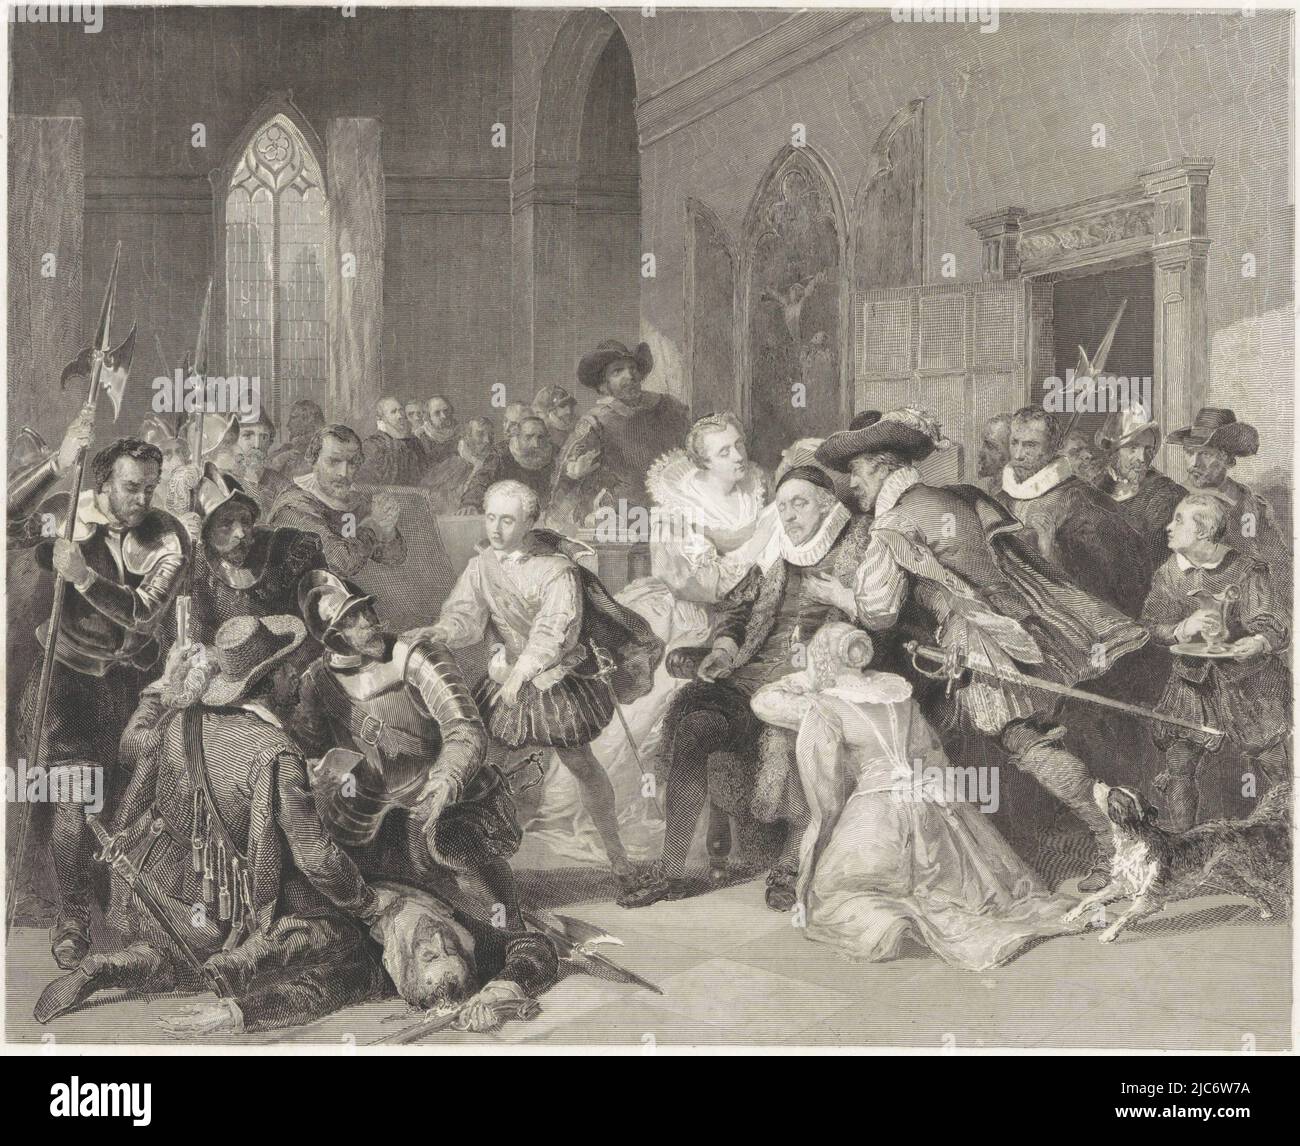 Attack of Jean de Jauregui on Prince William I, 18 March 1582 in Antwerp. Interior showing the prince sitting wounded in a chair, with family and others around him. To the left on the floor is the body of the slain Jean de Jauregui. Maurice asks the soldiers to examine him., Attack of Jean de Jauregui on Prince William I, 18 March 1582, print maker: Johann Wilhelm Kaiser (I), (mentioned on object), after: Nicolaas Pieneman, Amsterdam, 12-Aug-1853, paper, etching, engraving, h 415 mm × w 490 mm Stock Photo